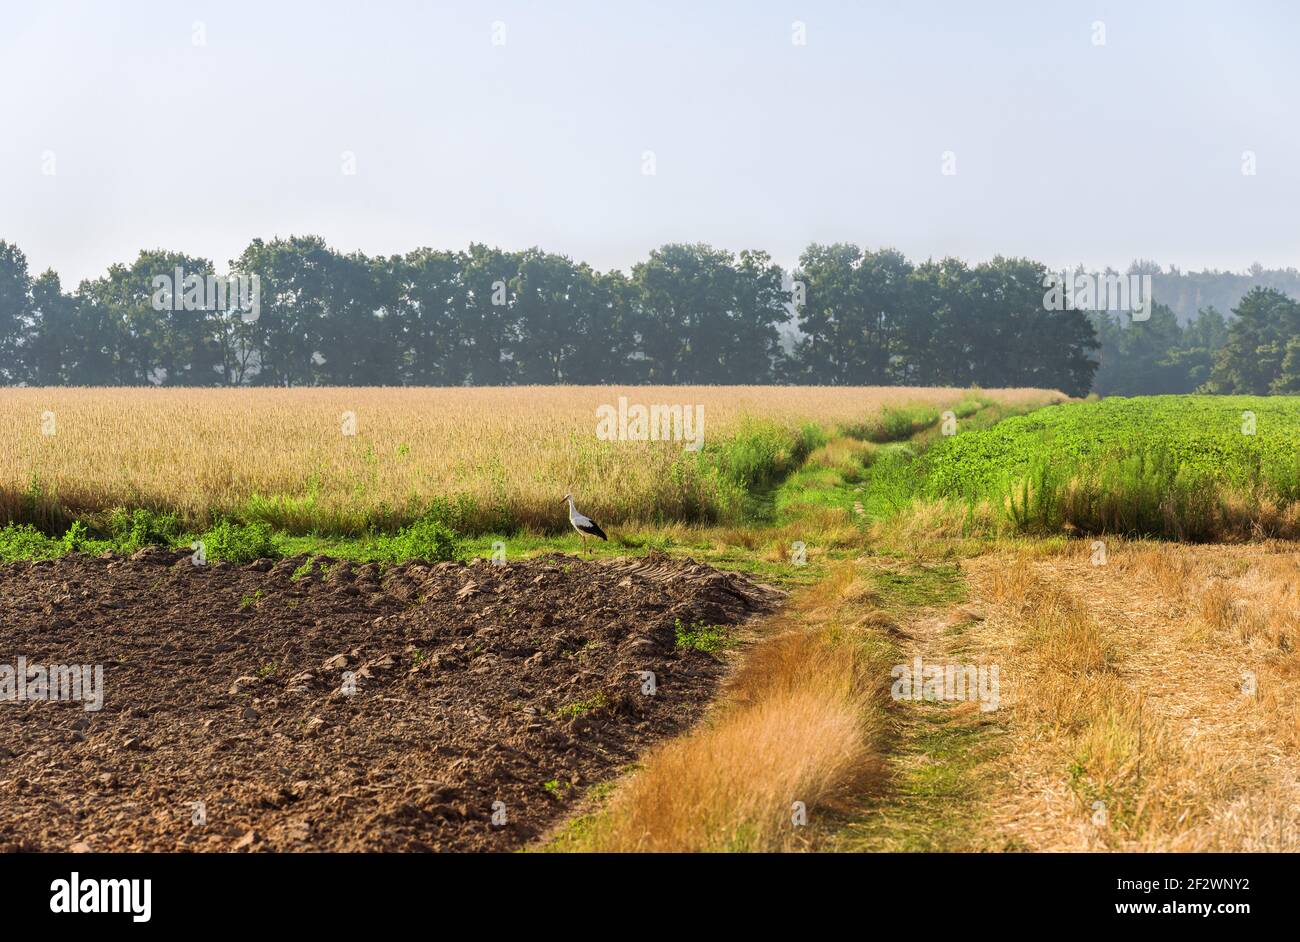 Stork in the field. A fragment of a wheat field, a plowed field and a field with beans. Stock Photo